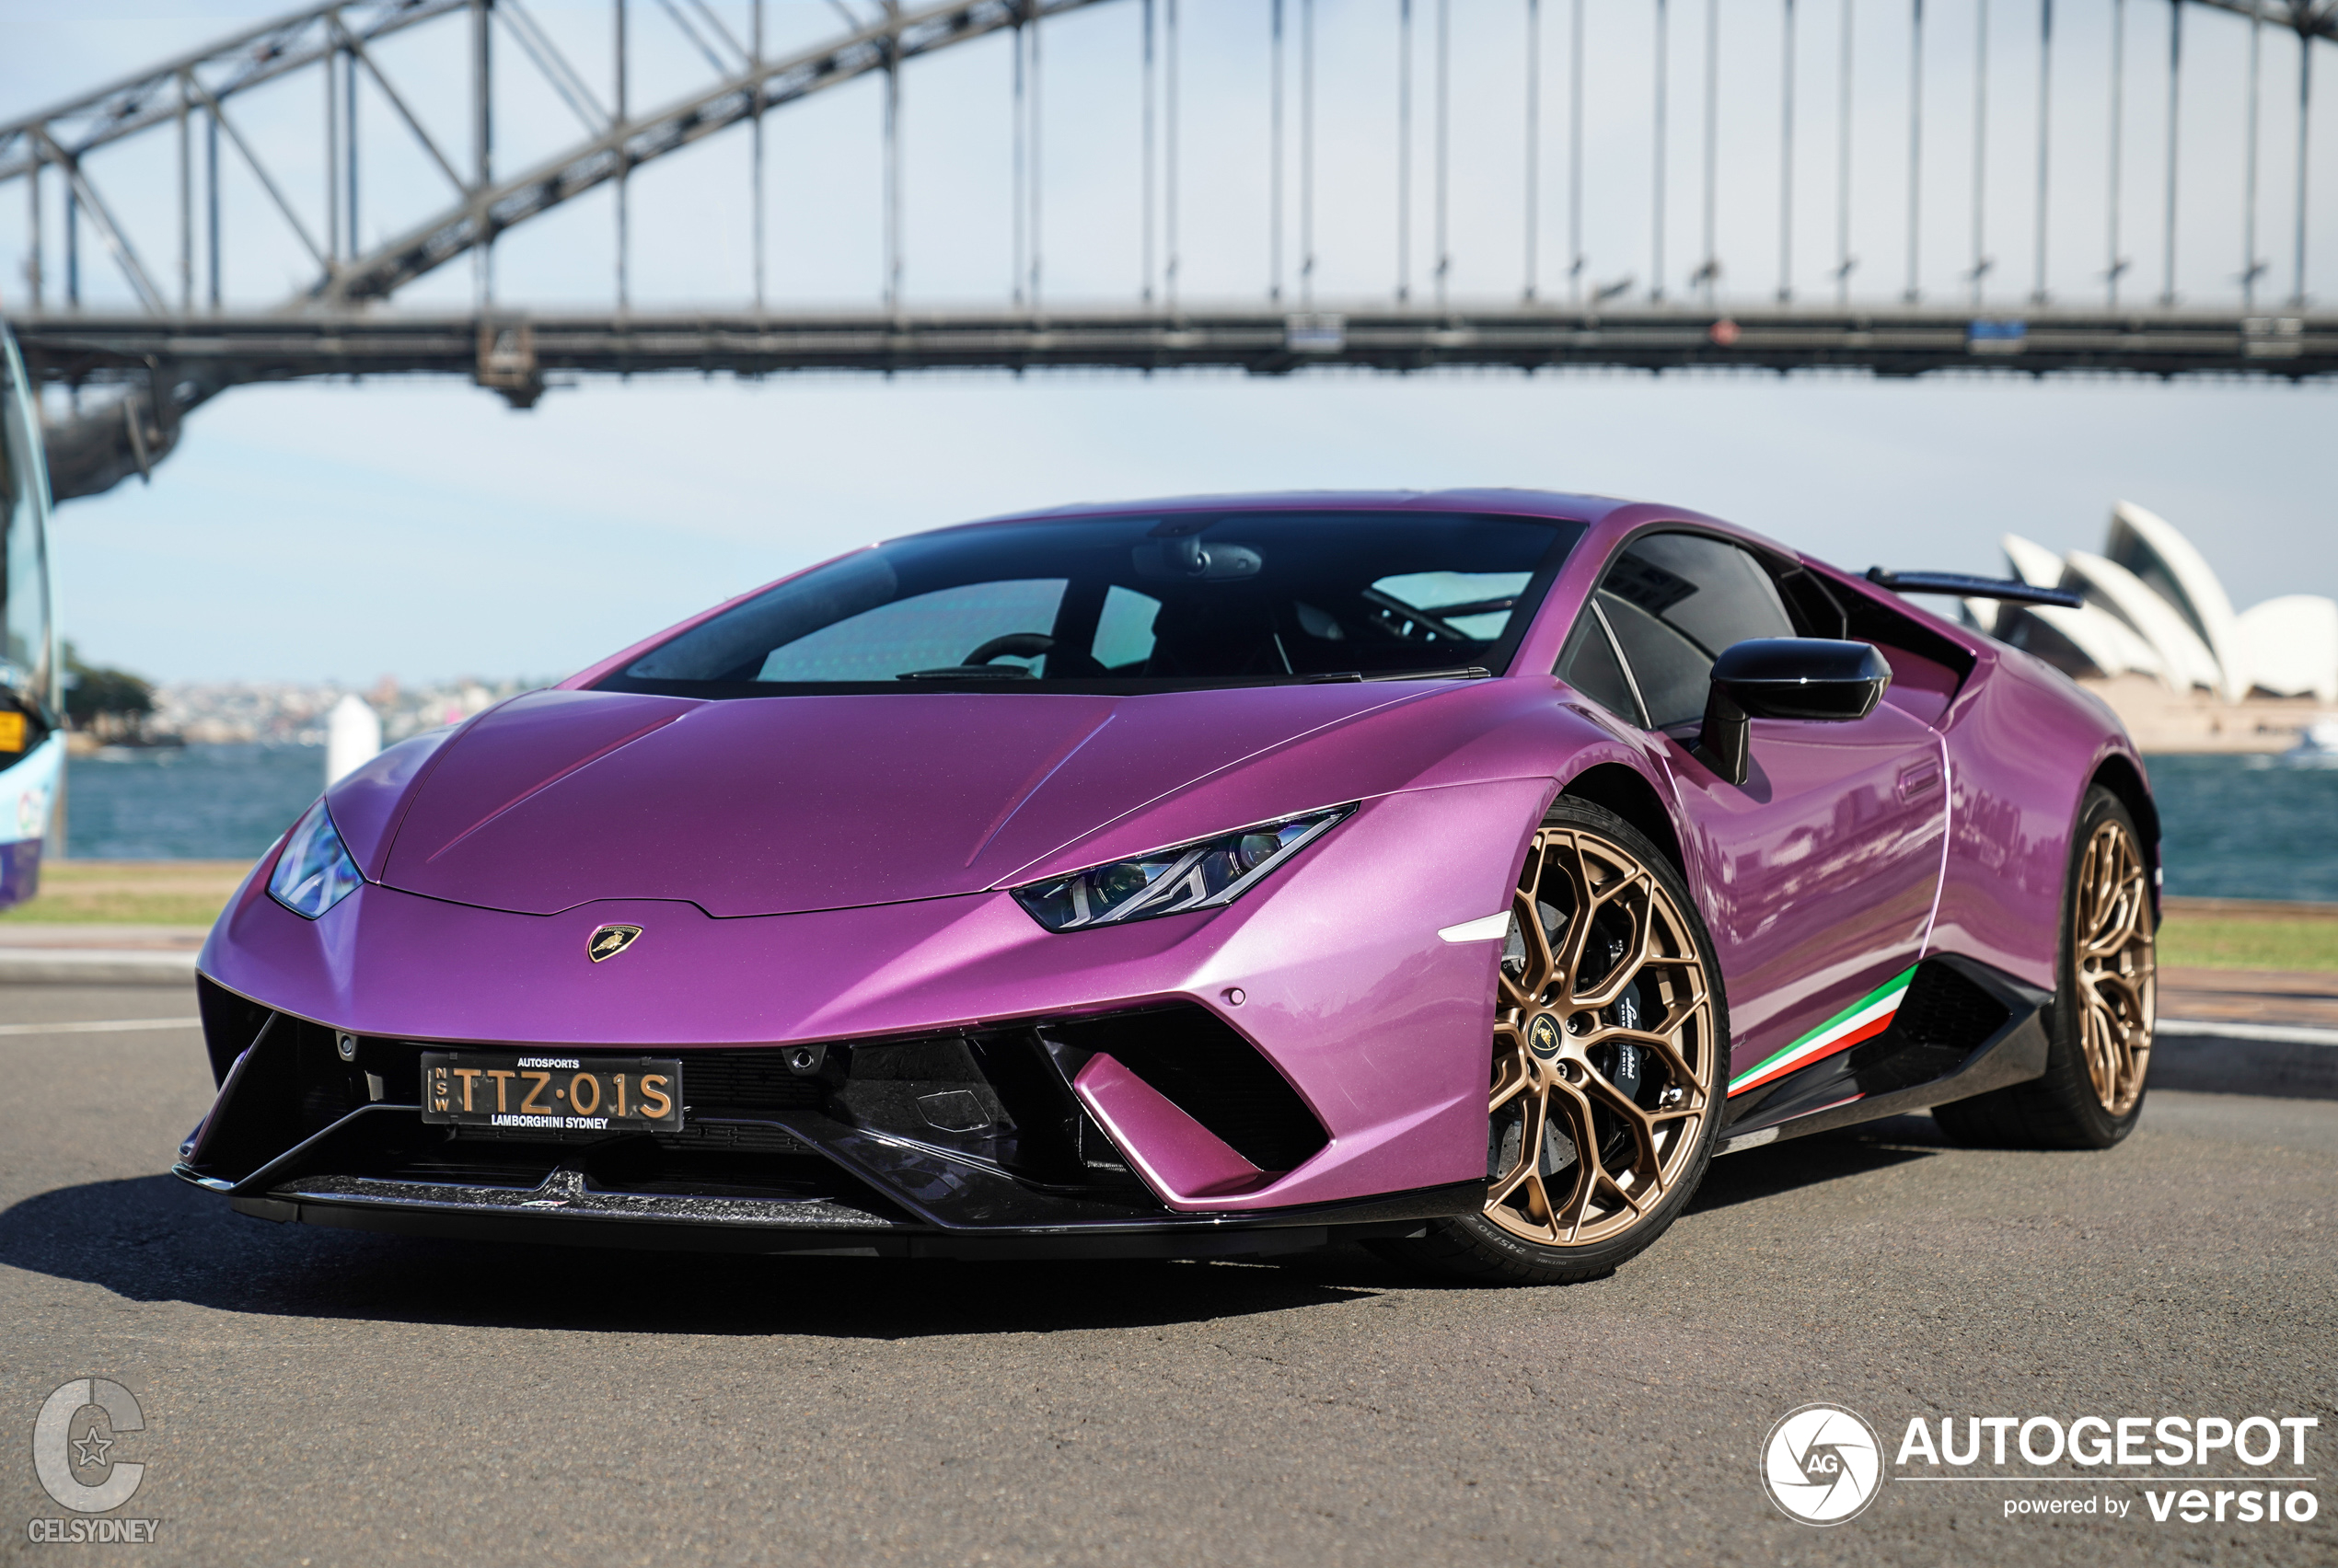 Gorgeous Pictures of a Huracán Performante from Australia